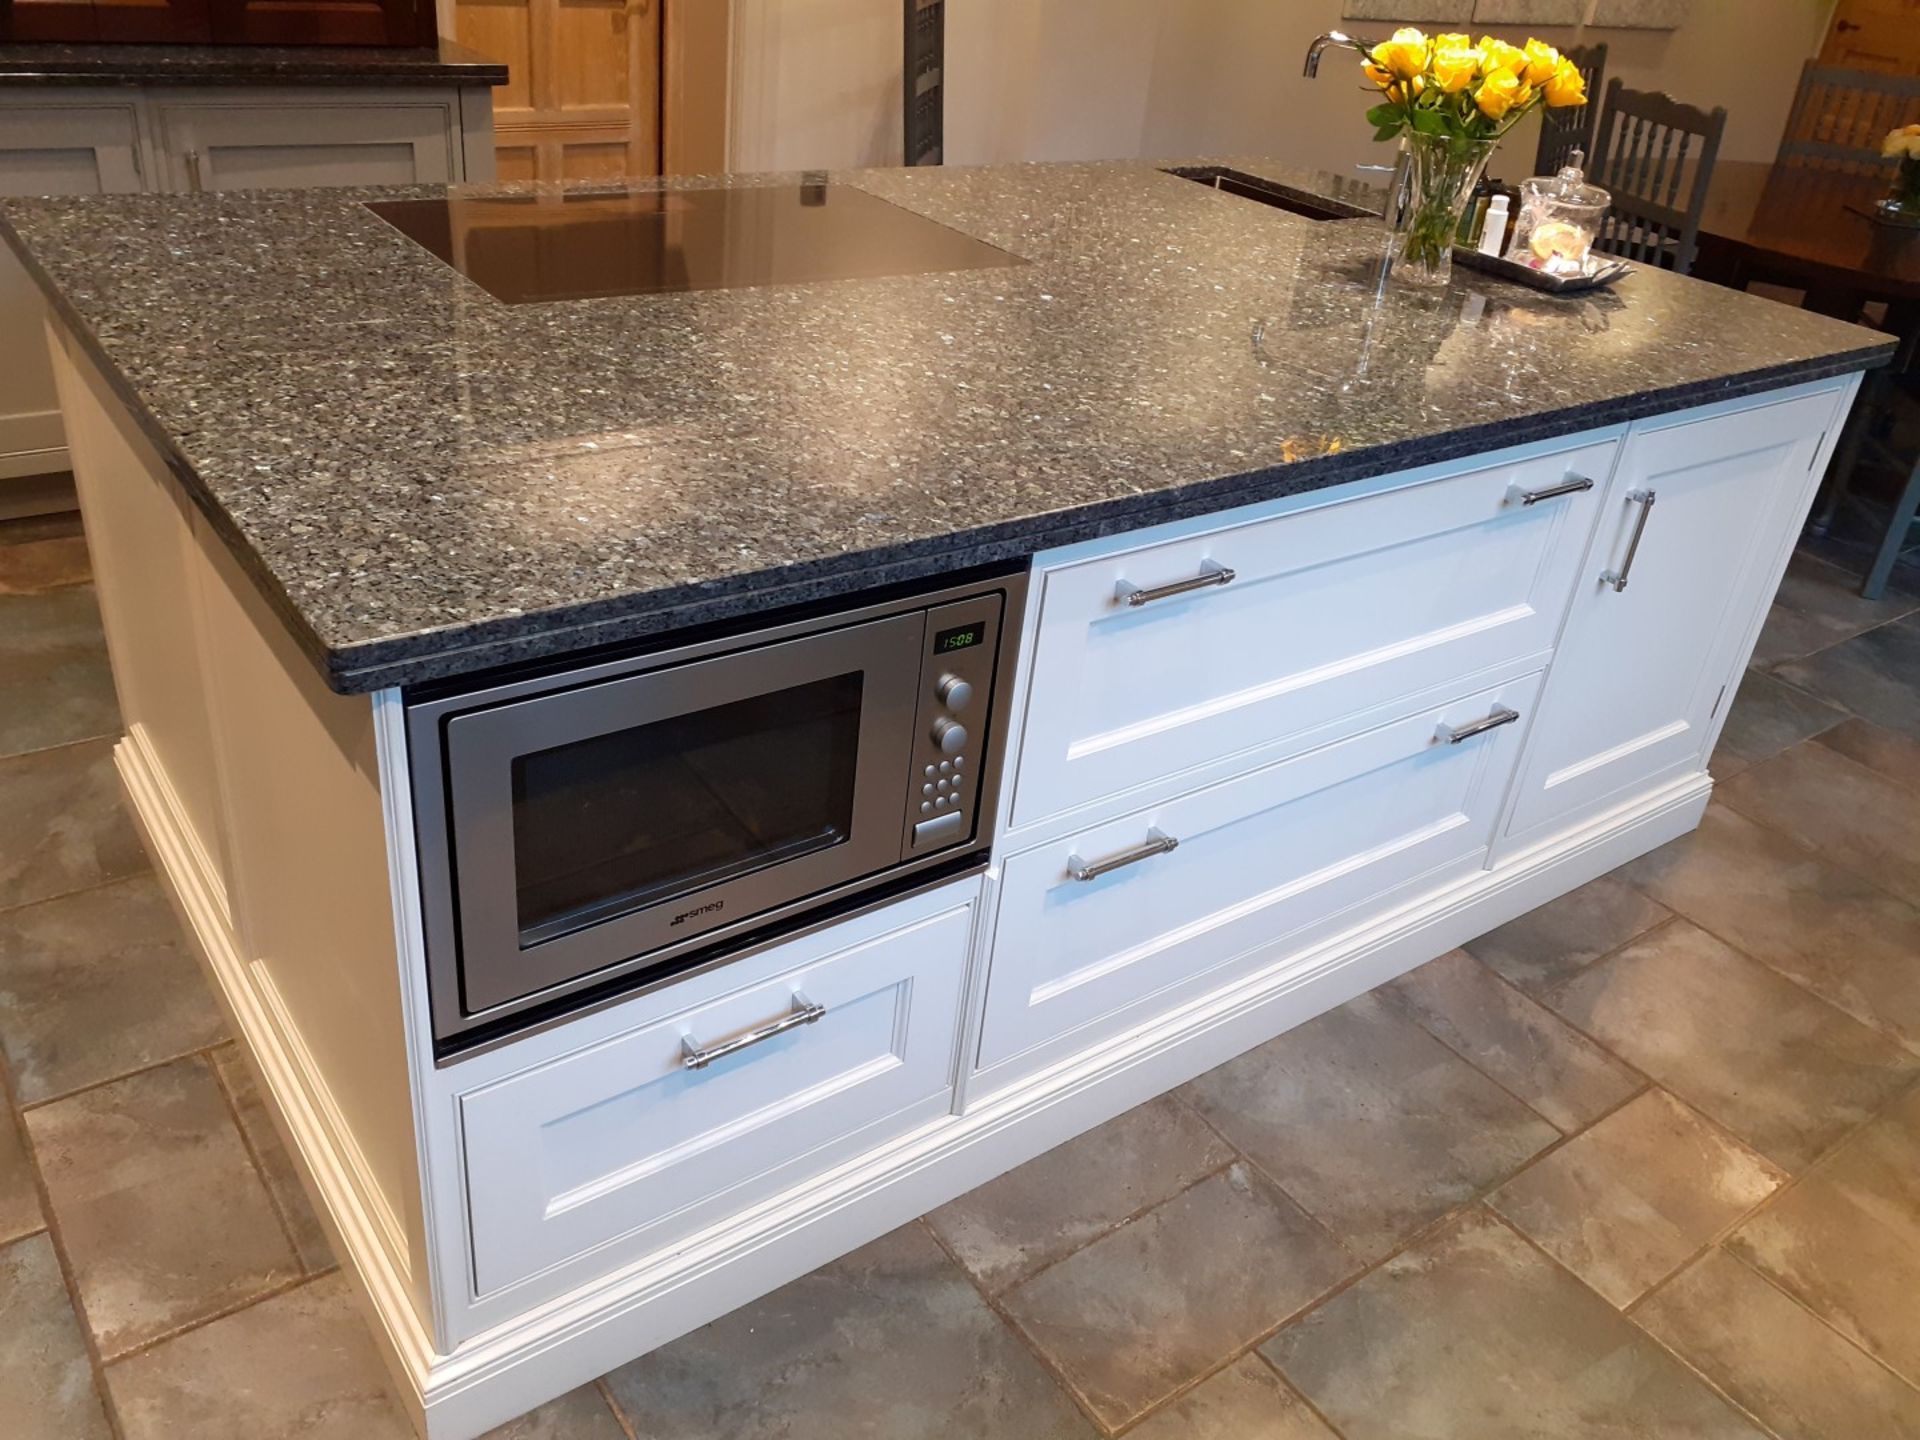 1 x Tom Howley Bespoke Solid Wood Kitchen Beautifully. Appointed With Granite Worktops - Image 28 of 138